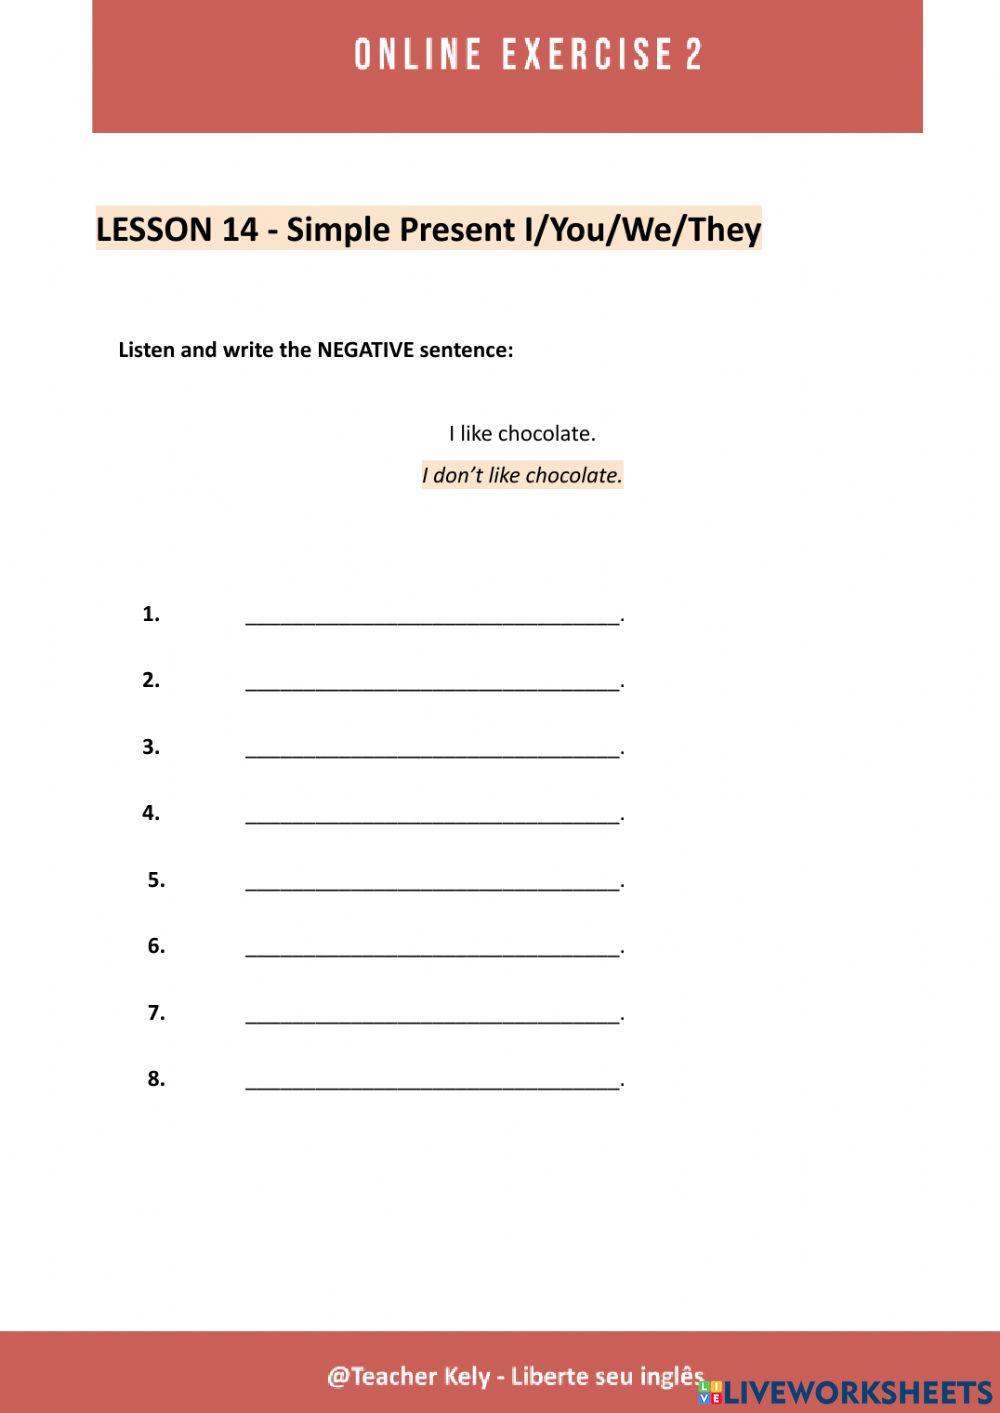 LESSON14-Exercise-2